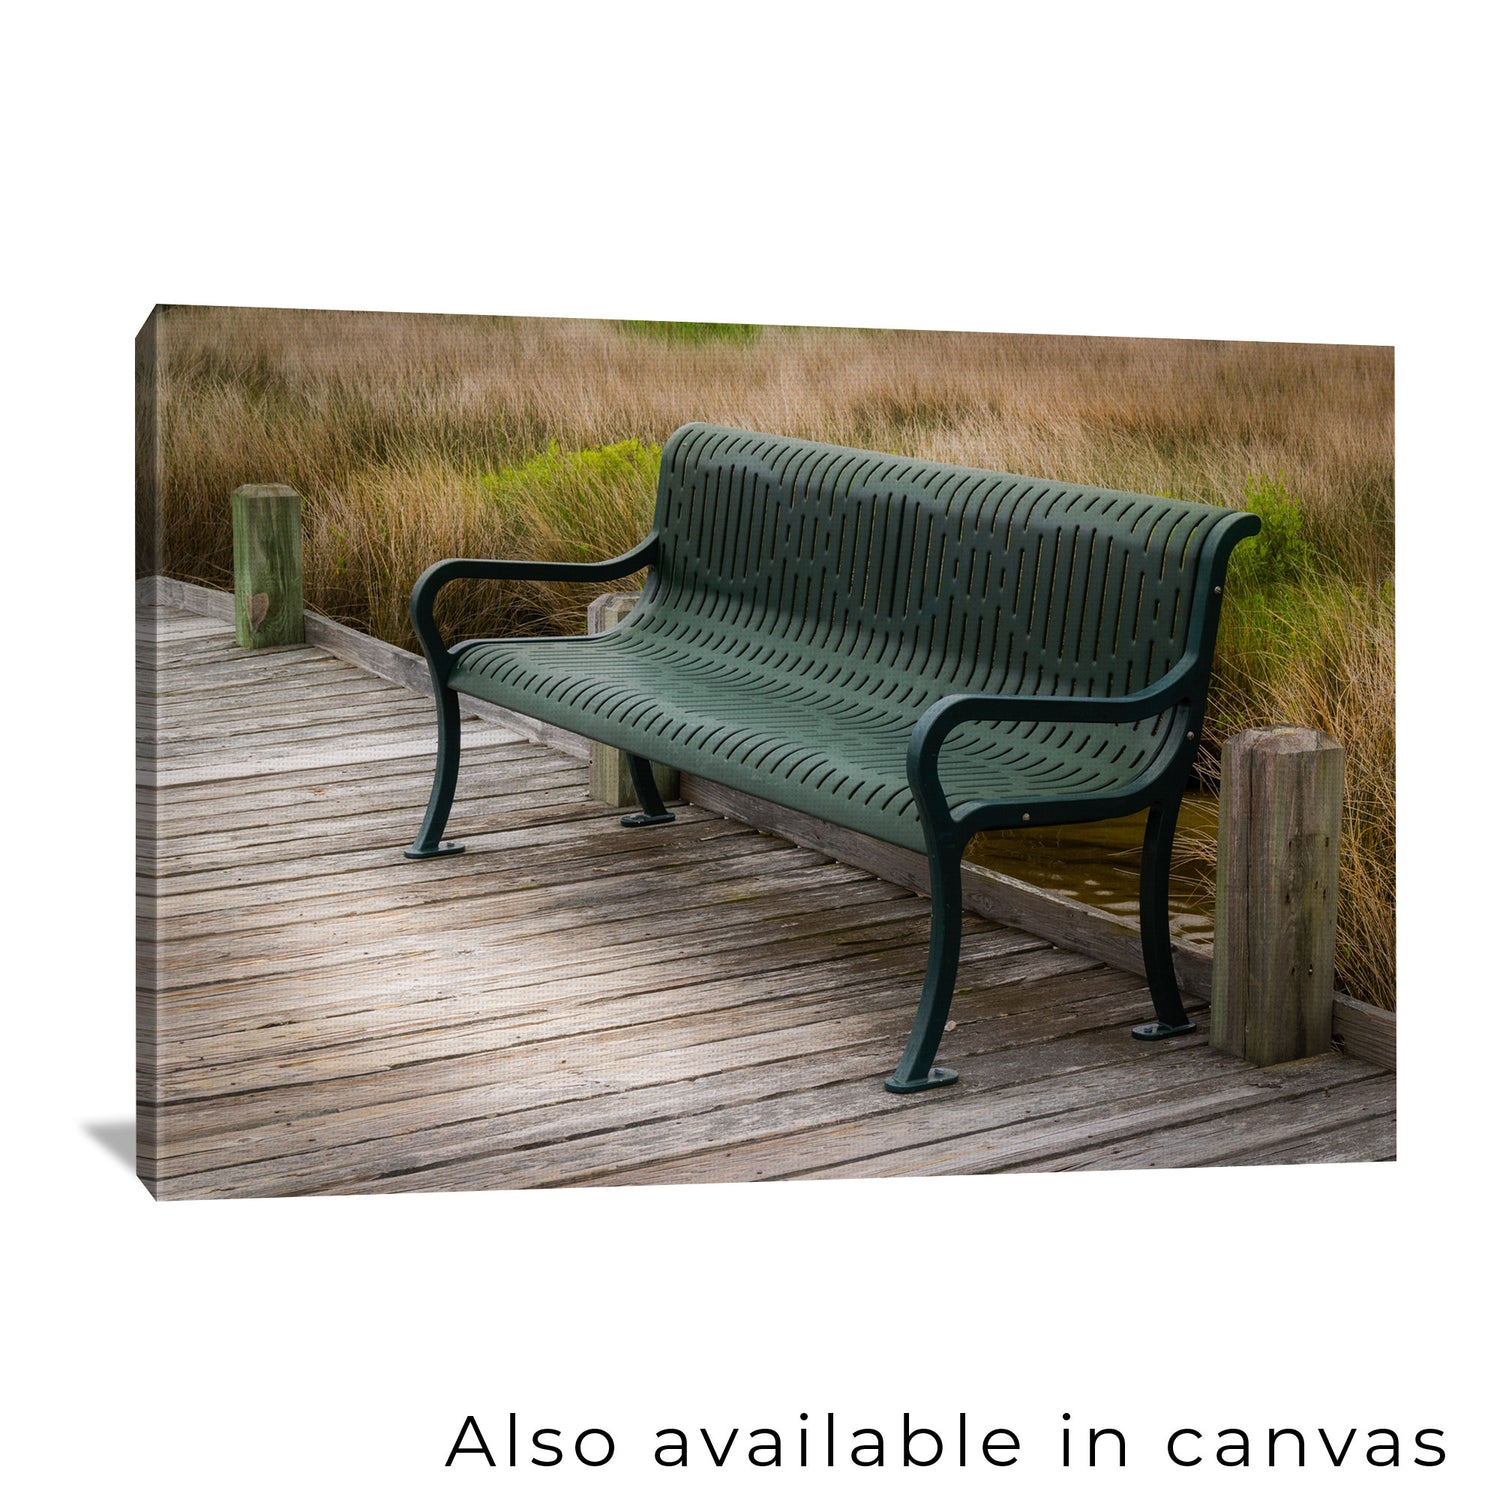 The photograph is beautifully presented on a gallery-wrapped canvas, showing this photograph is also available as a canvas print for those interested in a ready-to-hang solution.